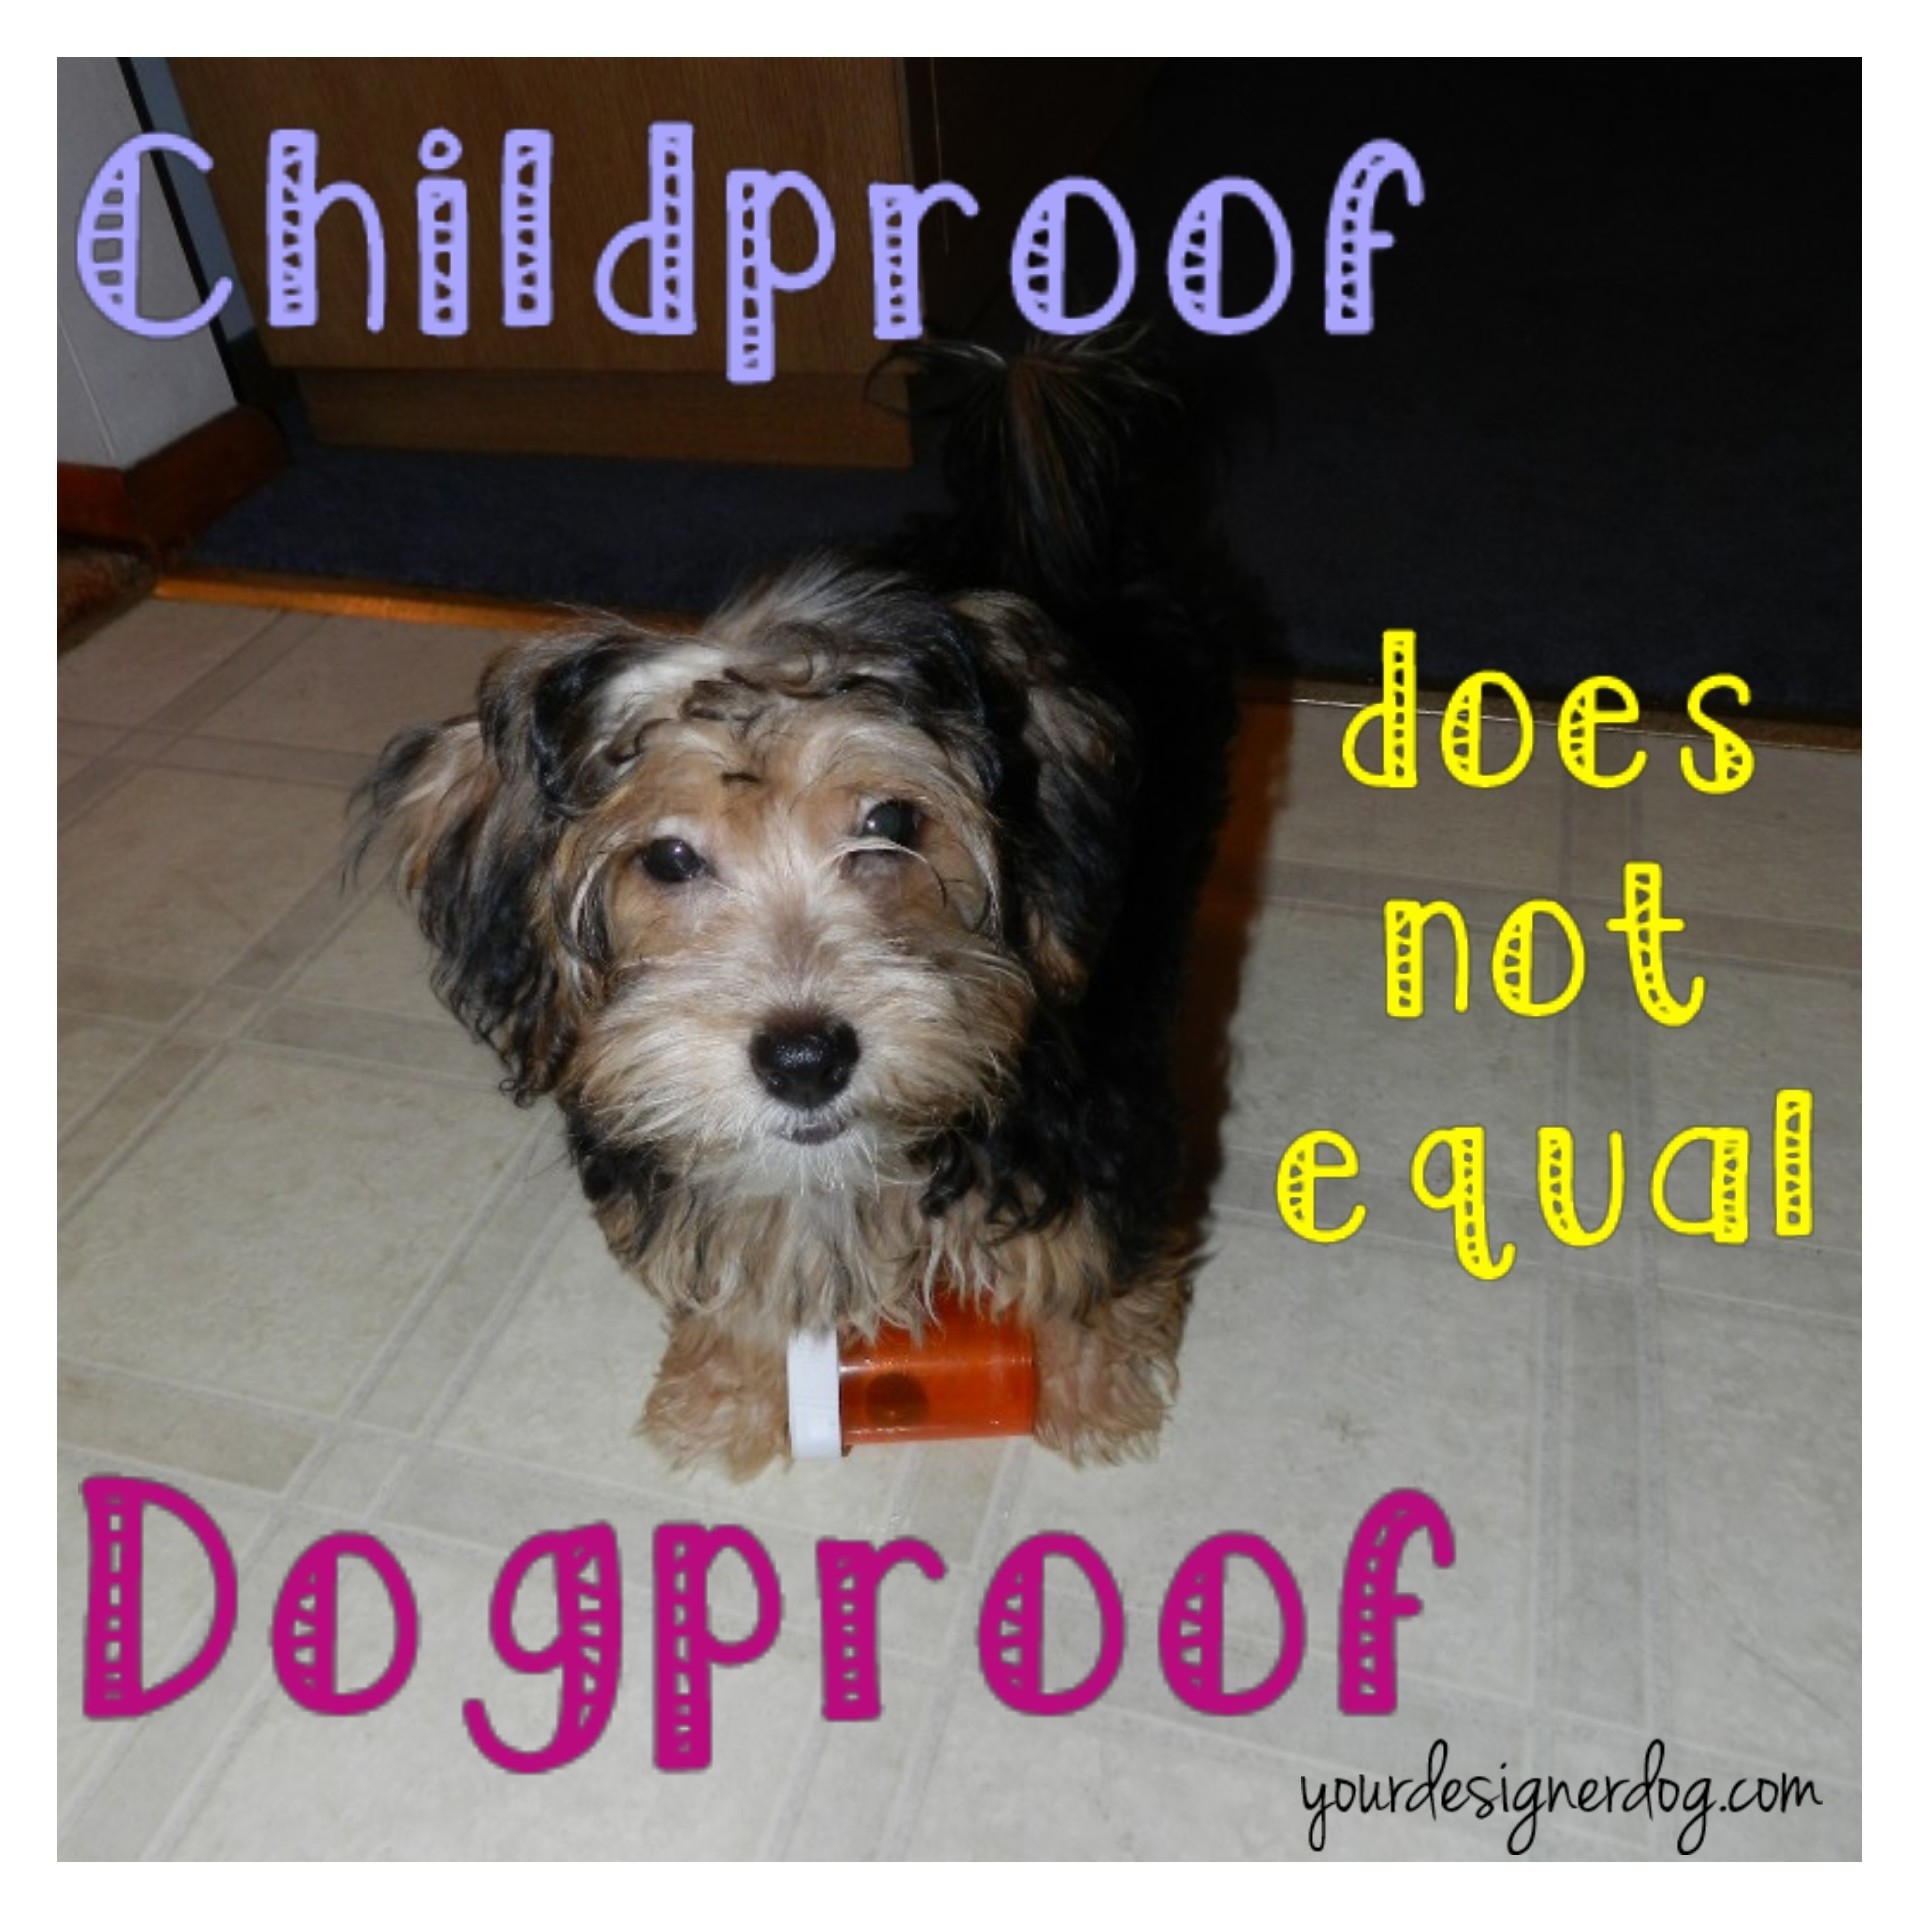 dogs, designer dogs, yorkipoo, yorkie poo, childproof, dogproof, medication, pill bottle